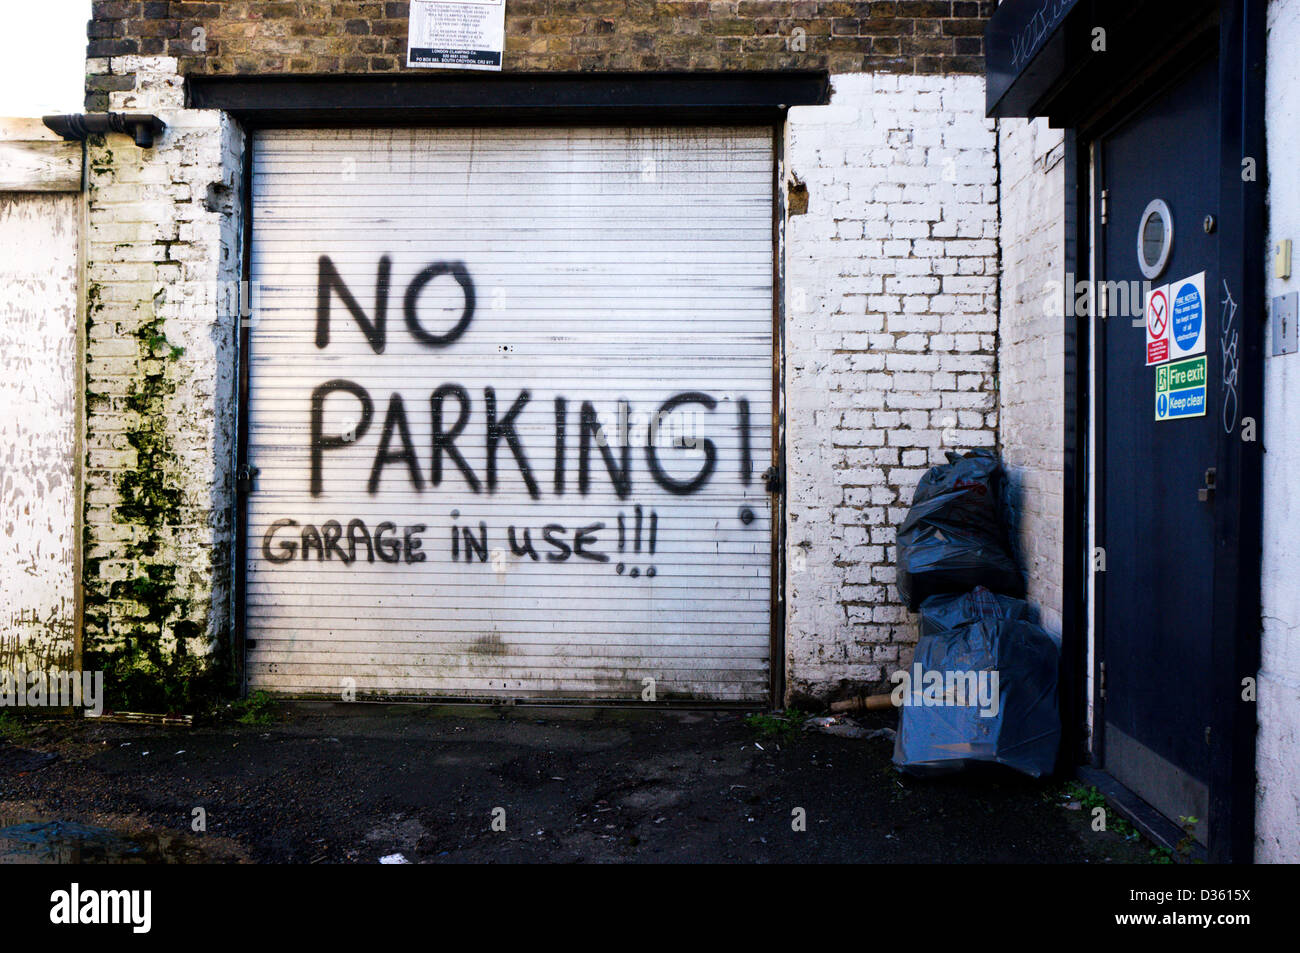 No Parking! Garage in Use!!! sign spray painted on roller shutter door. Stock Photo